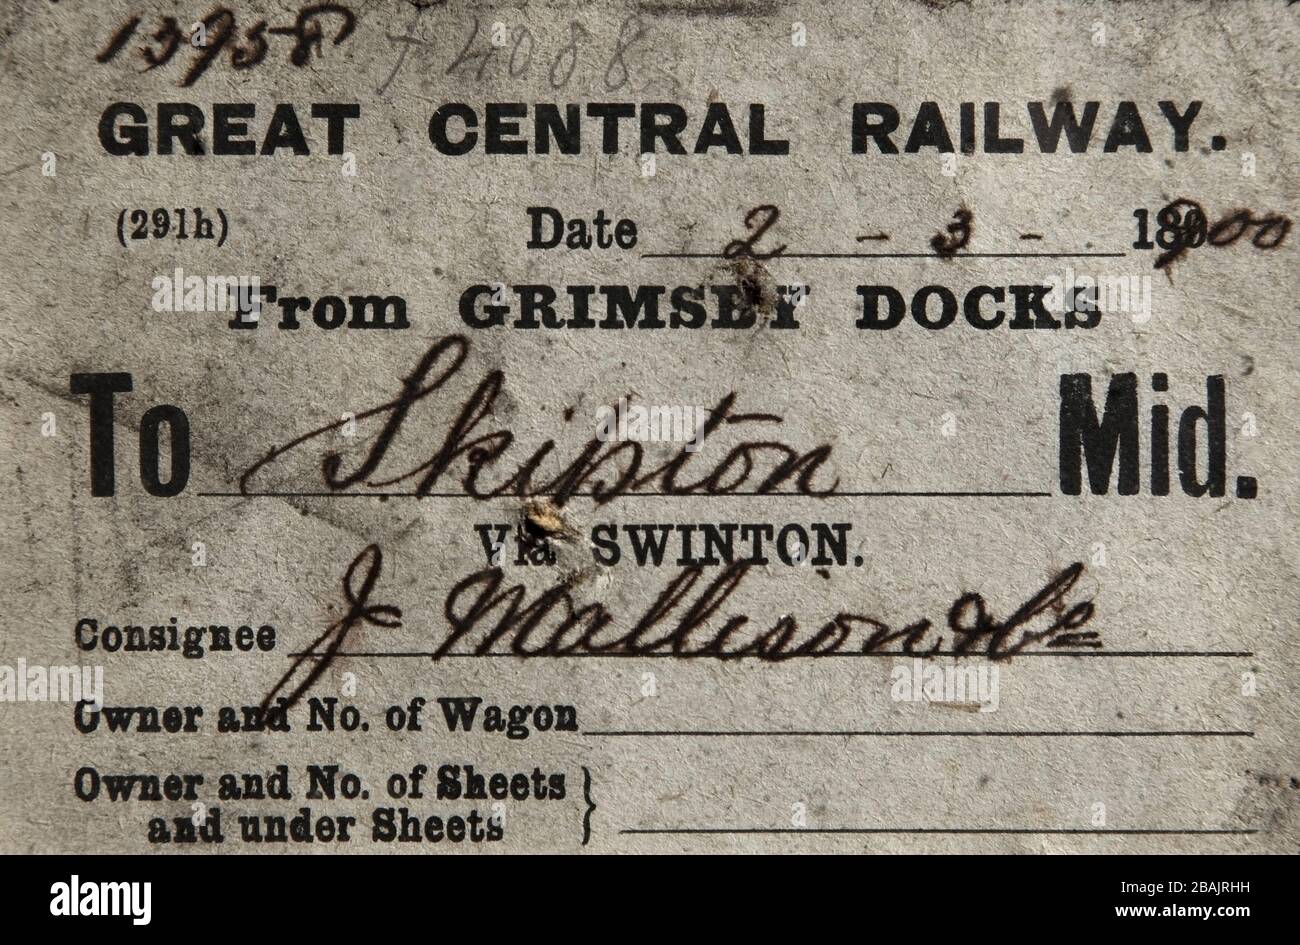 Old label for consignment of goods from Grimsby Docks to Skipton railway station, Great Central Railway, 2 March 1900. Stock Photo